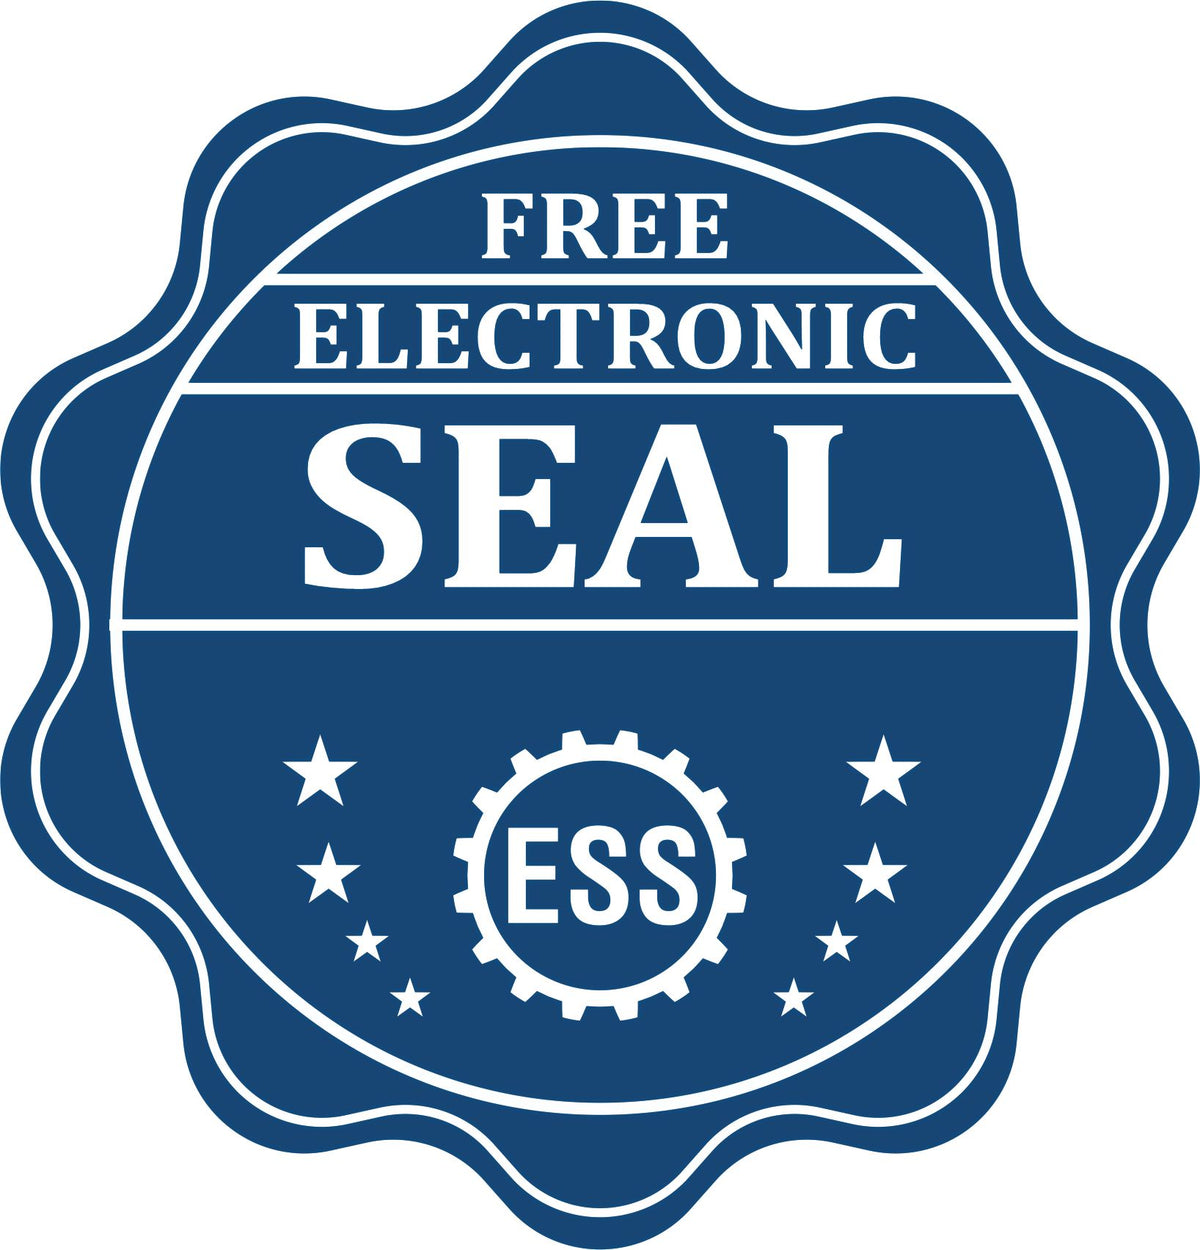 A badge showing a free electronic seal for the Handheld West Virginia Professional Engineer Embosser with stars and the ESS gear on the emblem.